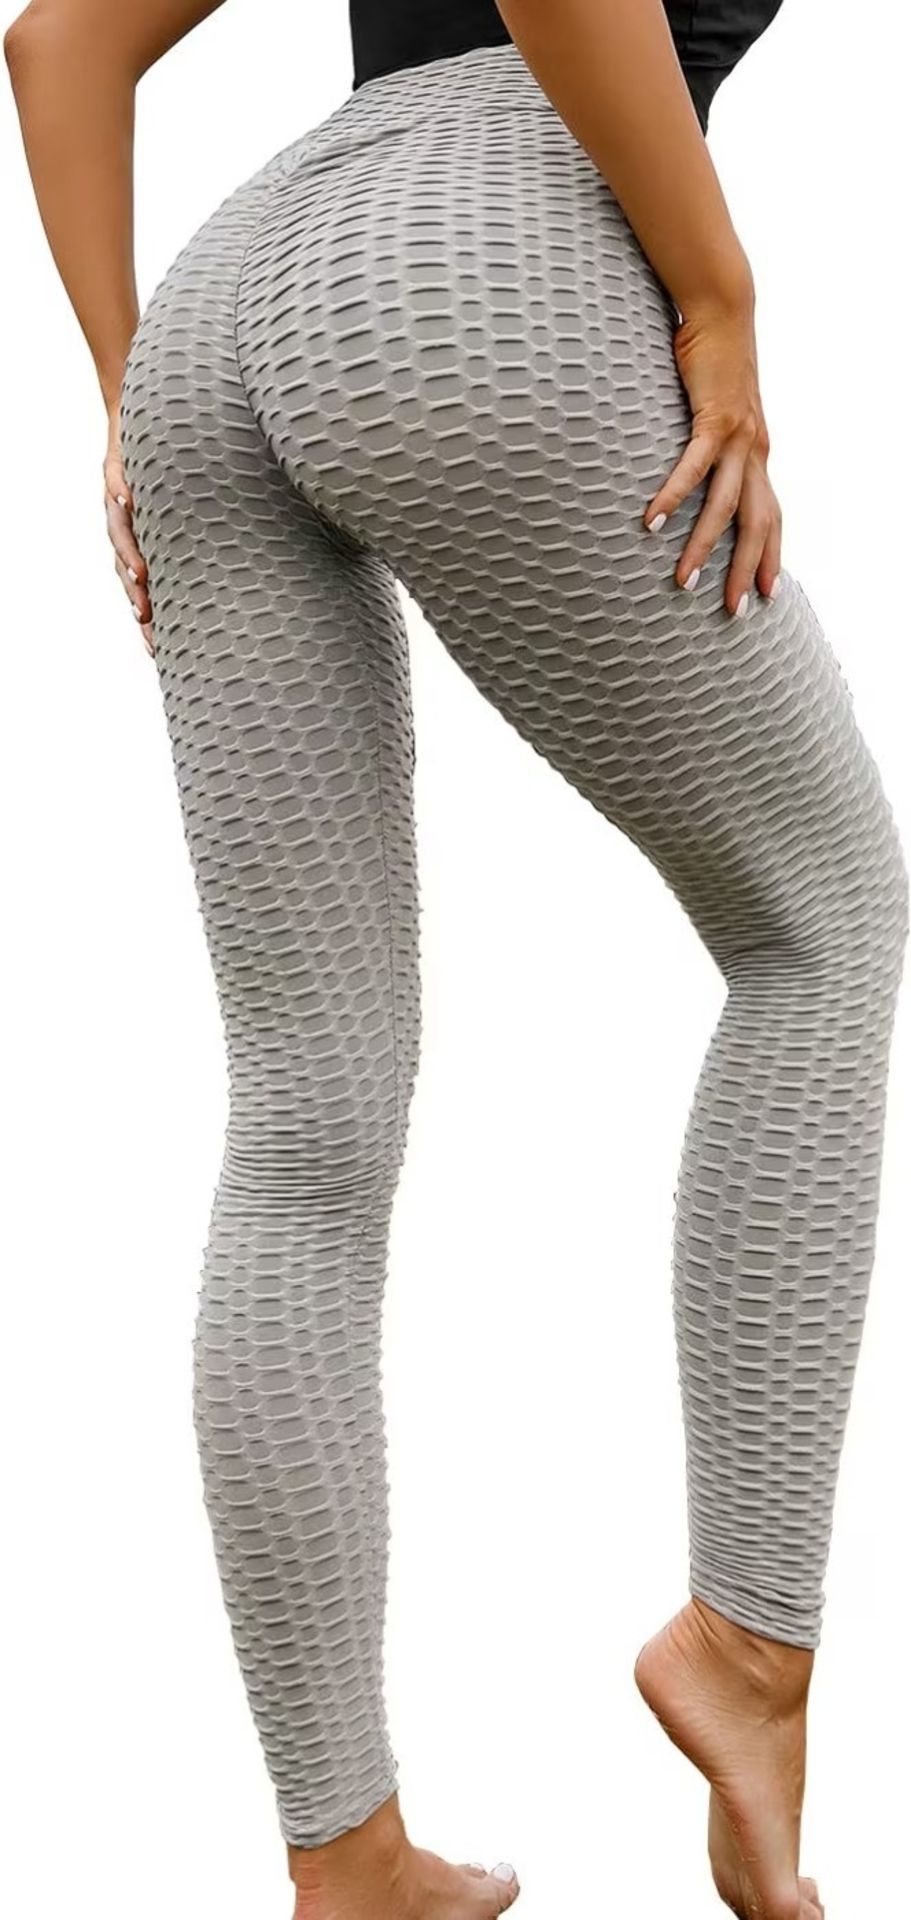 BRAND NEW Women's High Waisted Workout Leggings Yoga Gym Running Elastic Sports Ruched - Image 2 of 2